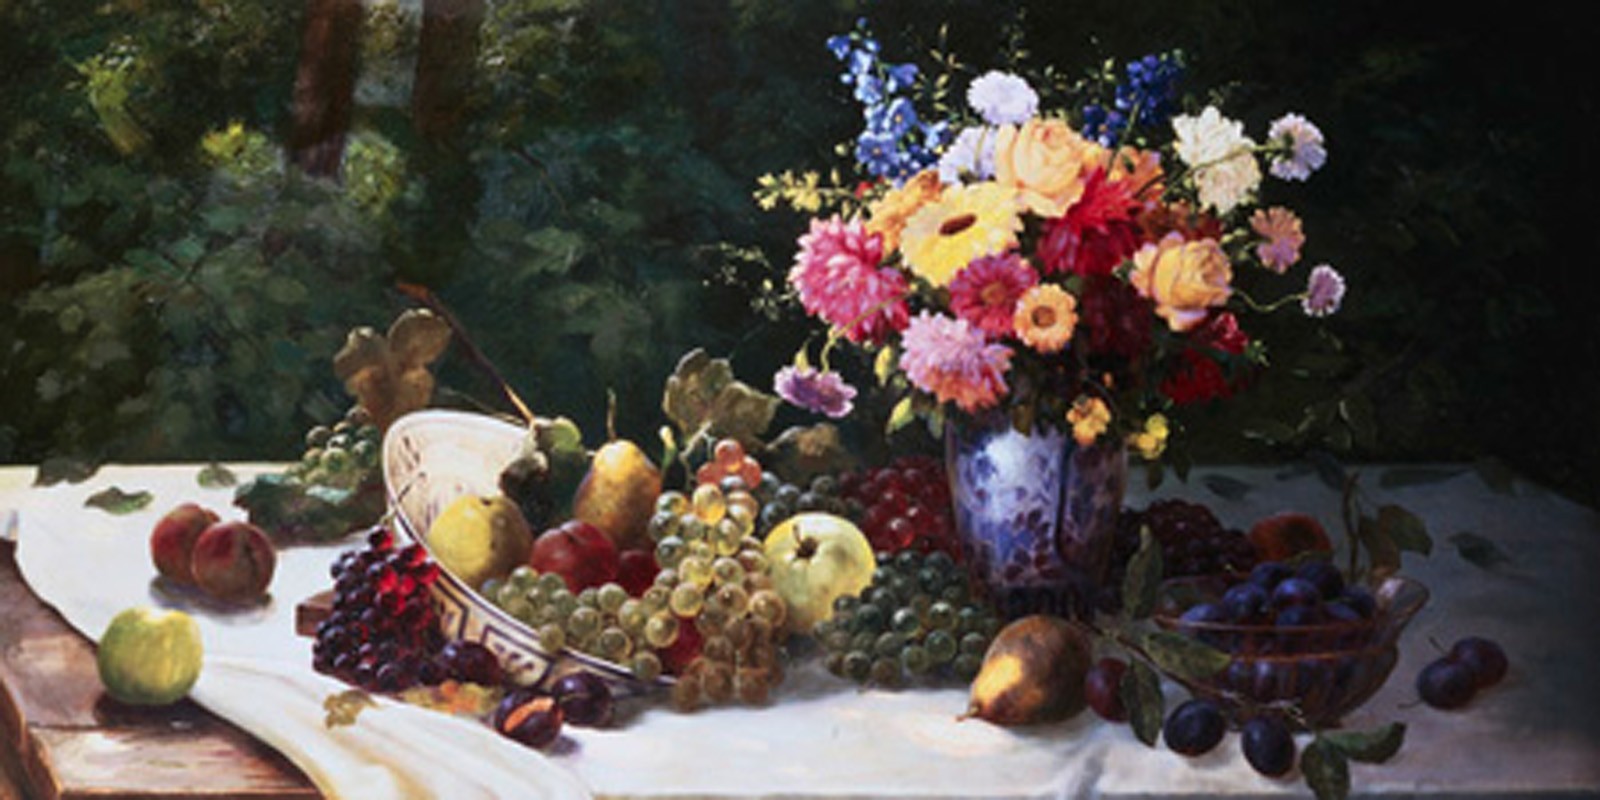 Adam Burghardt - Vase of Flowers and Fruit on a Draped Table